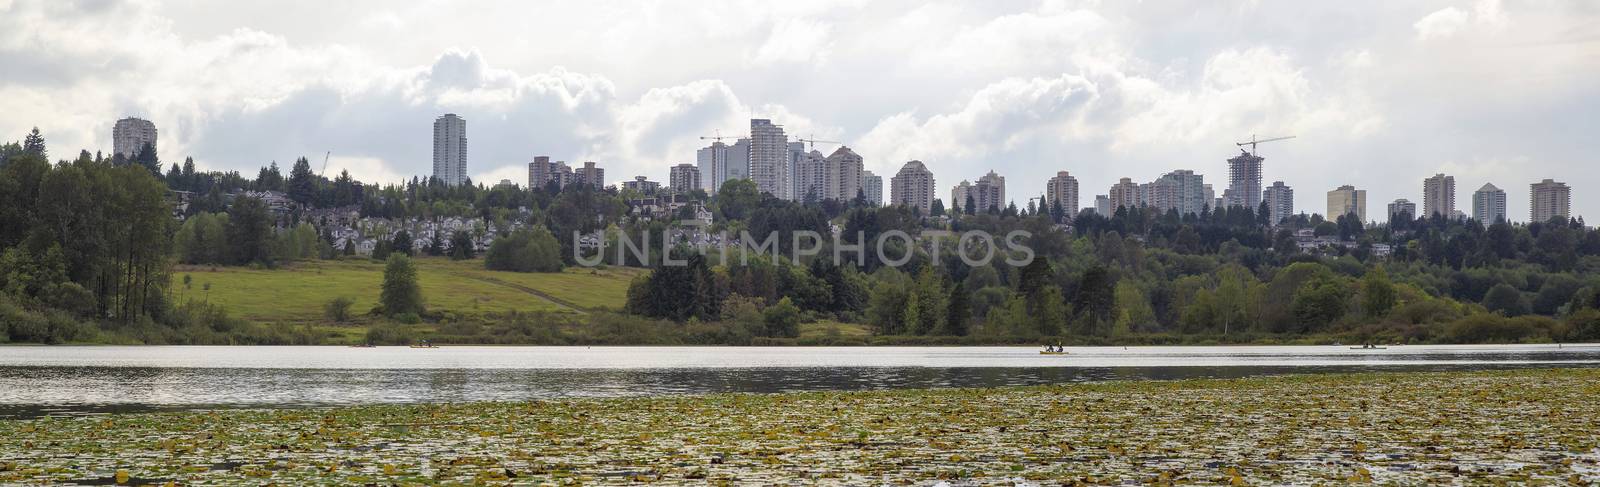 Burnaby BC Canada Downtown City Skyline from Deer Lake Panorama